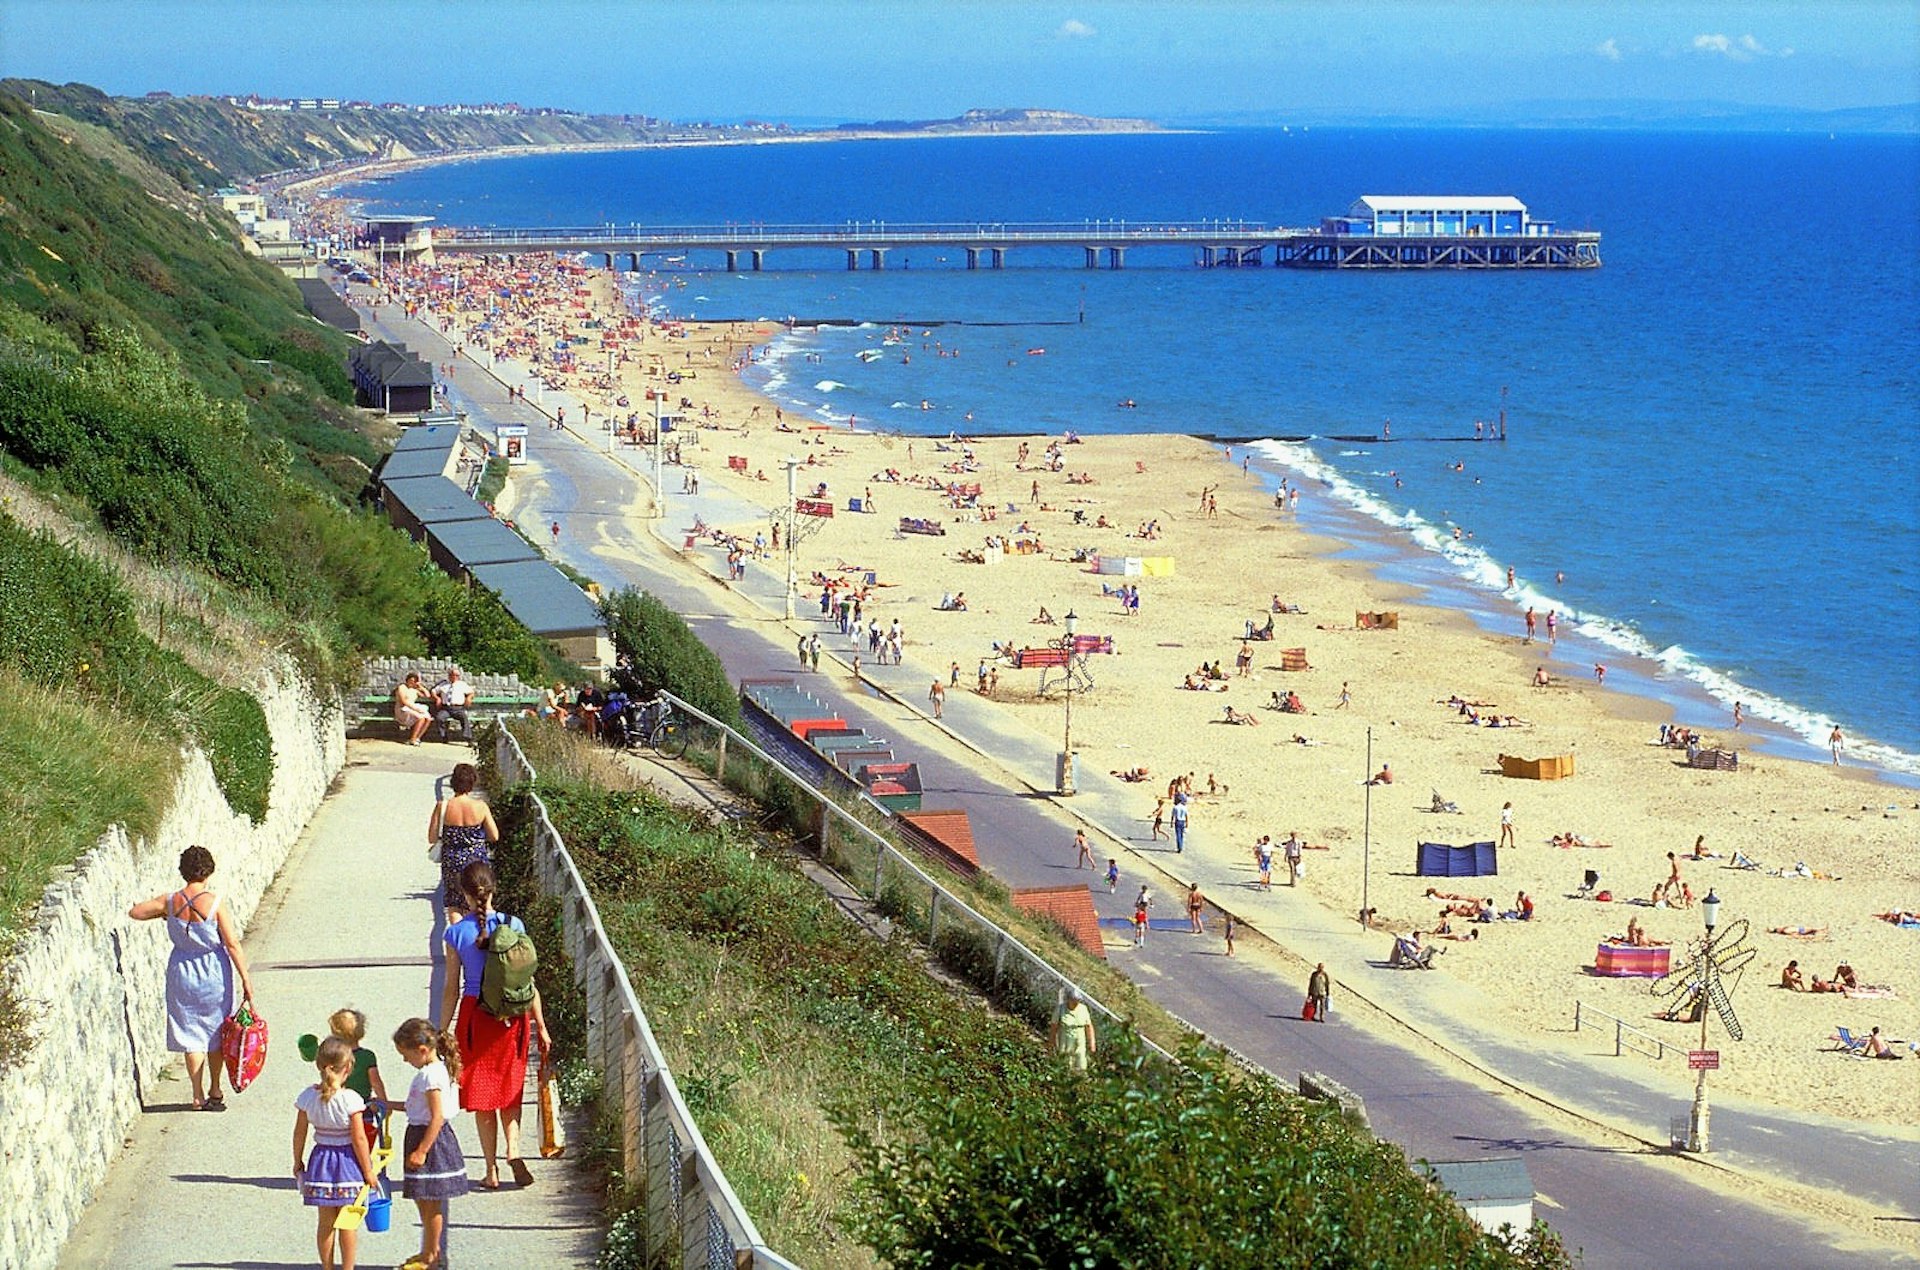 A sloping path leads down to Bournemouth beach